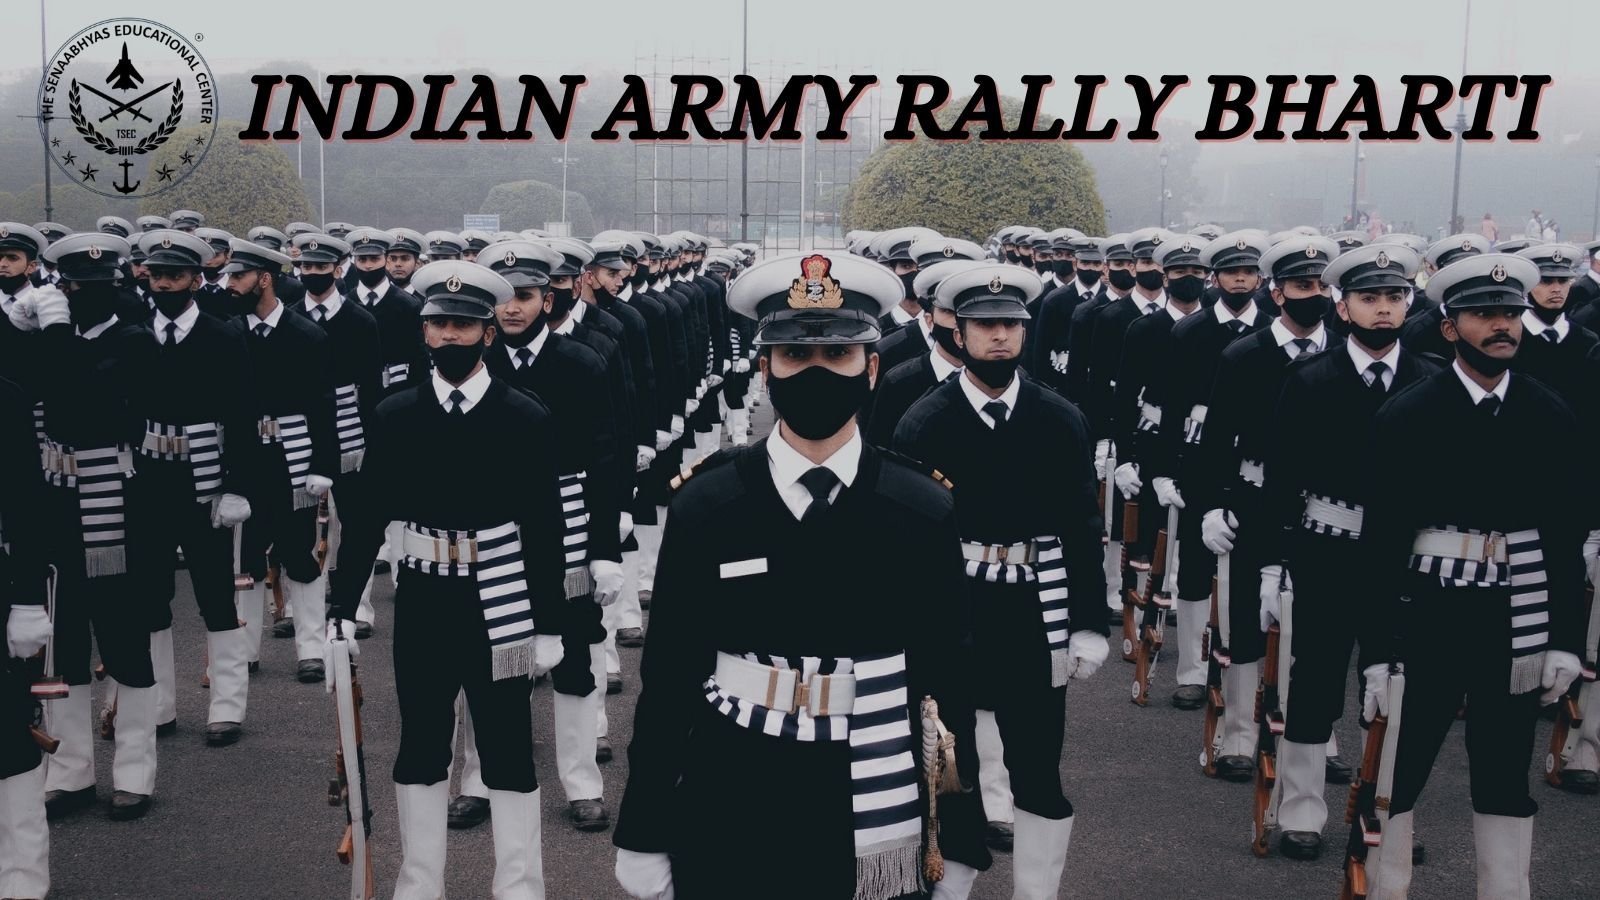 Indian Army Rally Bharti